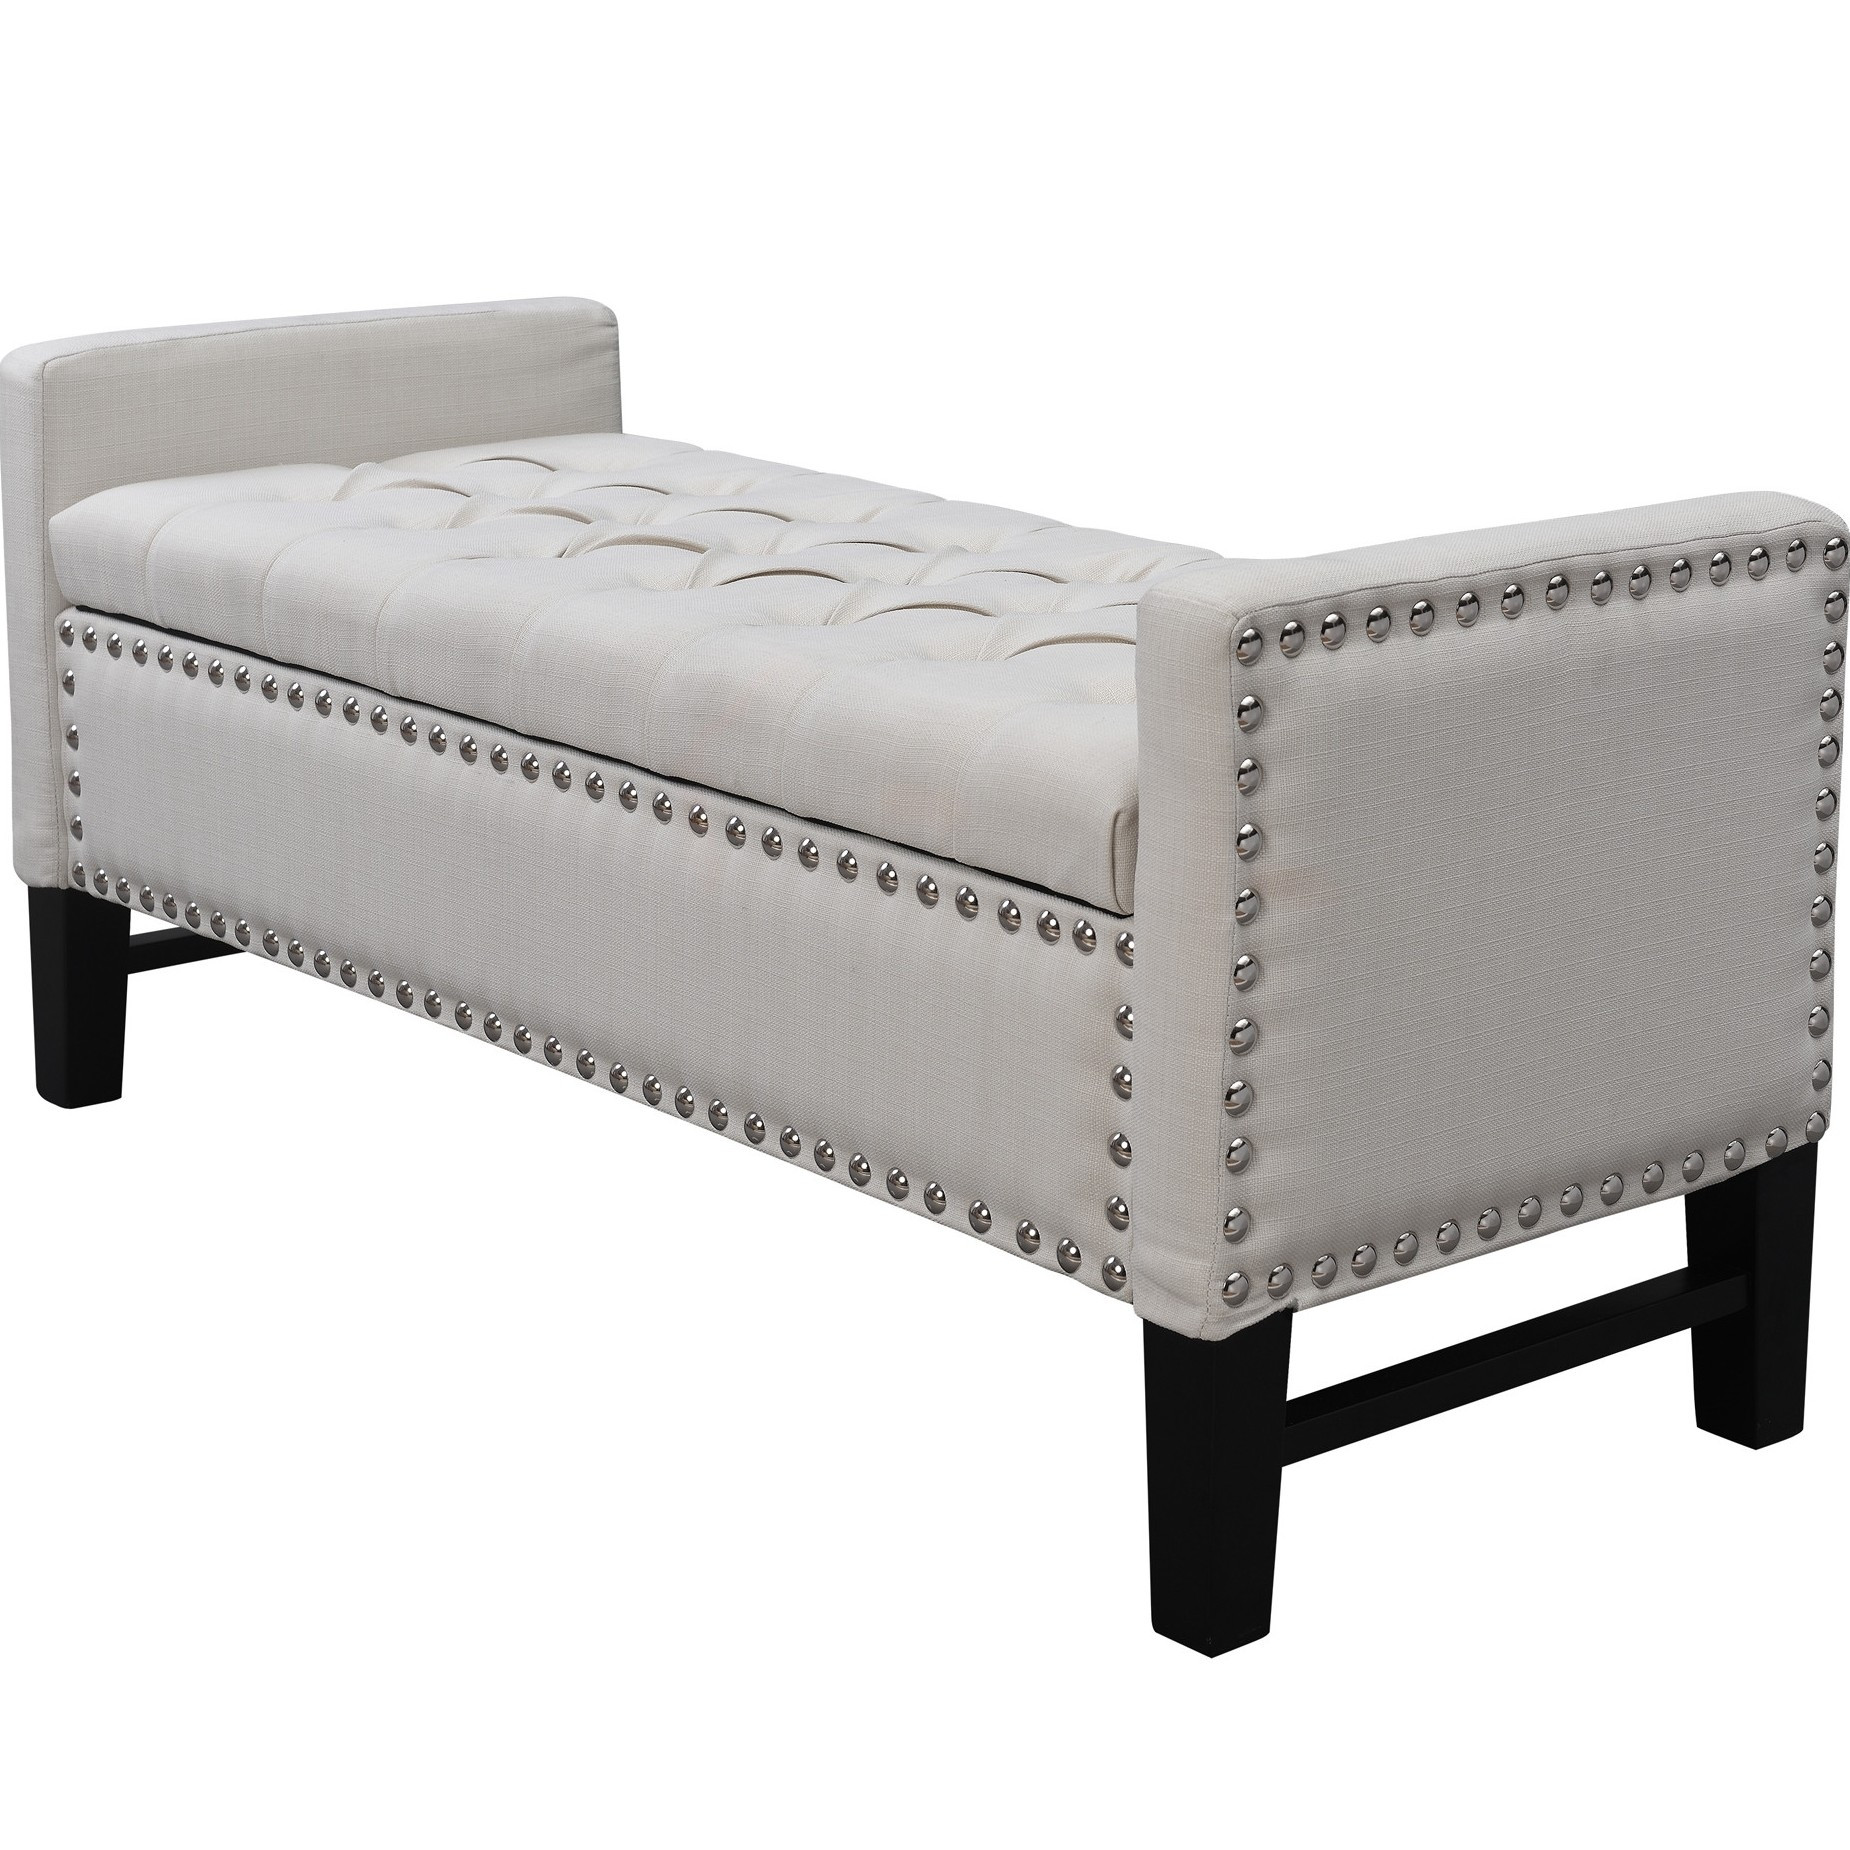 20" Cream Upholstered Linen Bench with Shoe Storage-530660-1